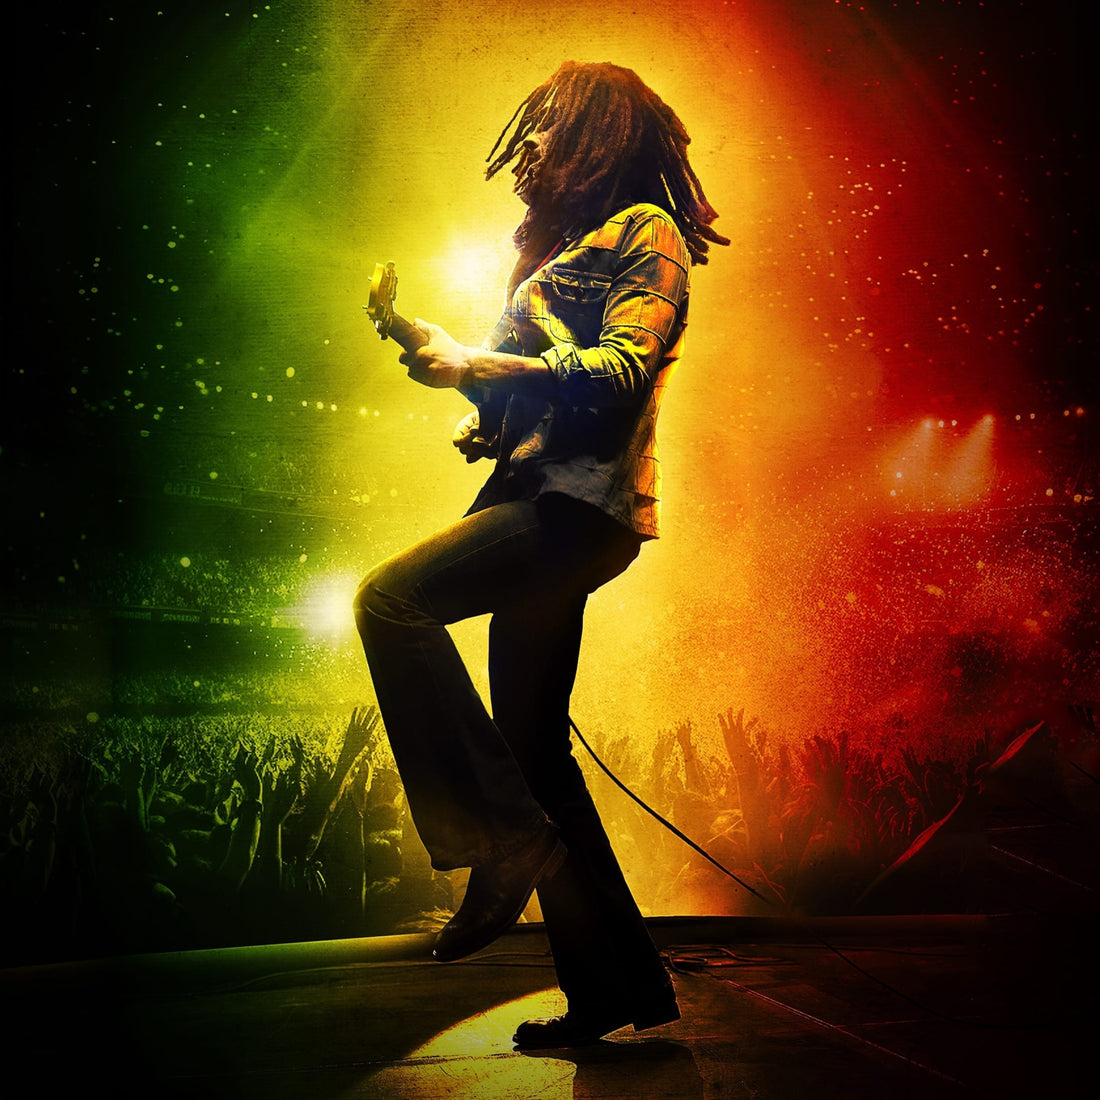 Bob Marley: Music with a Mission